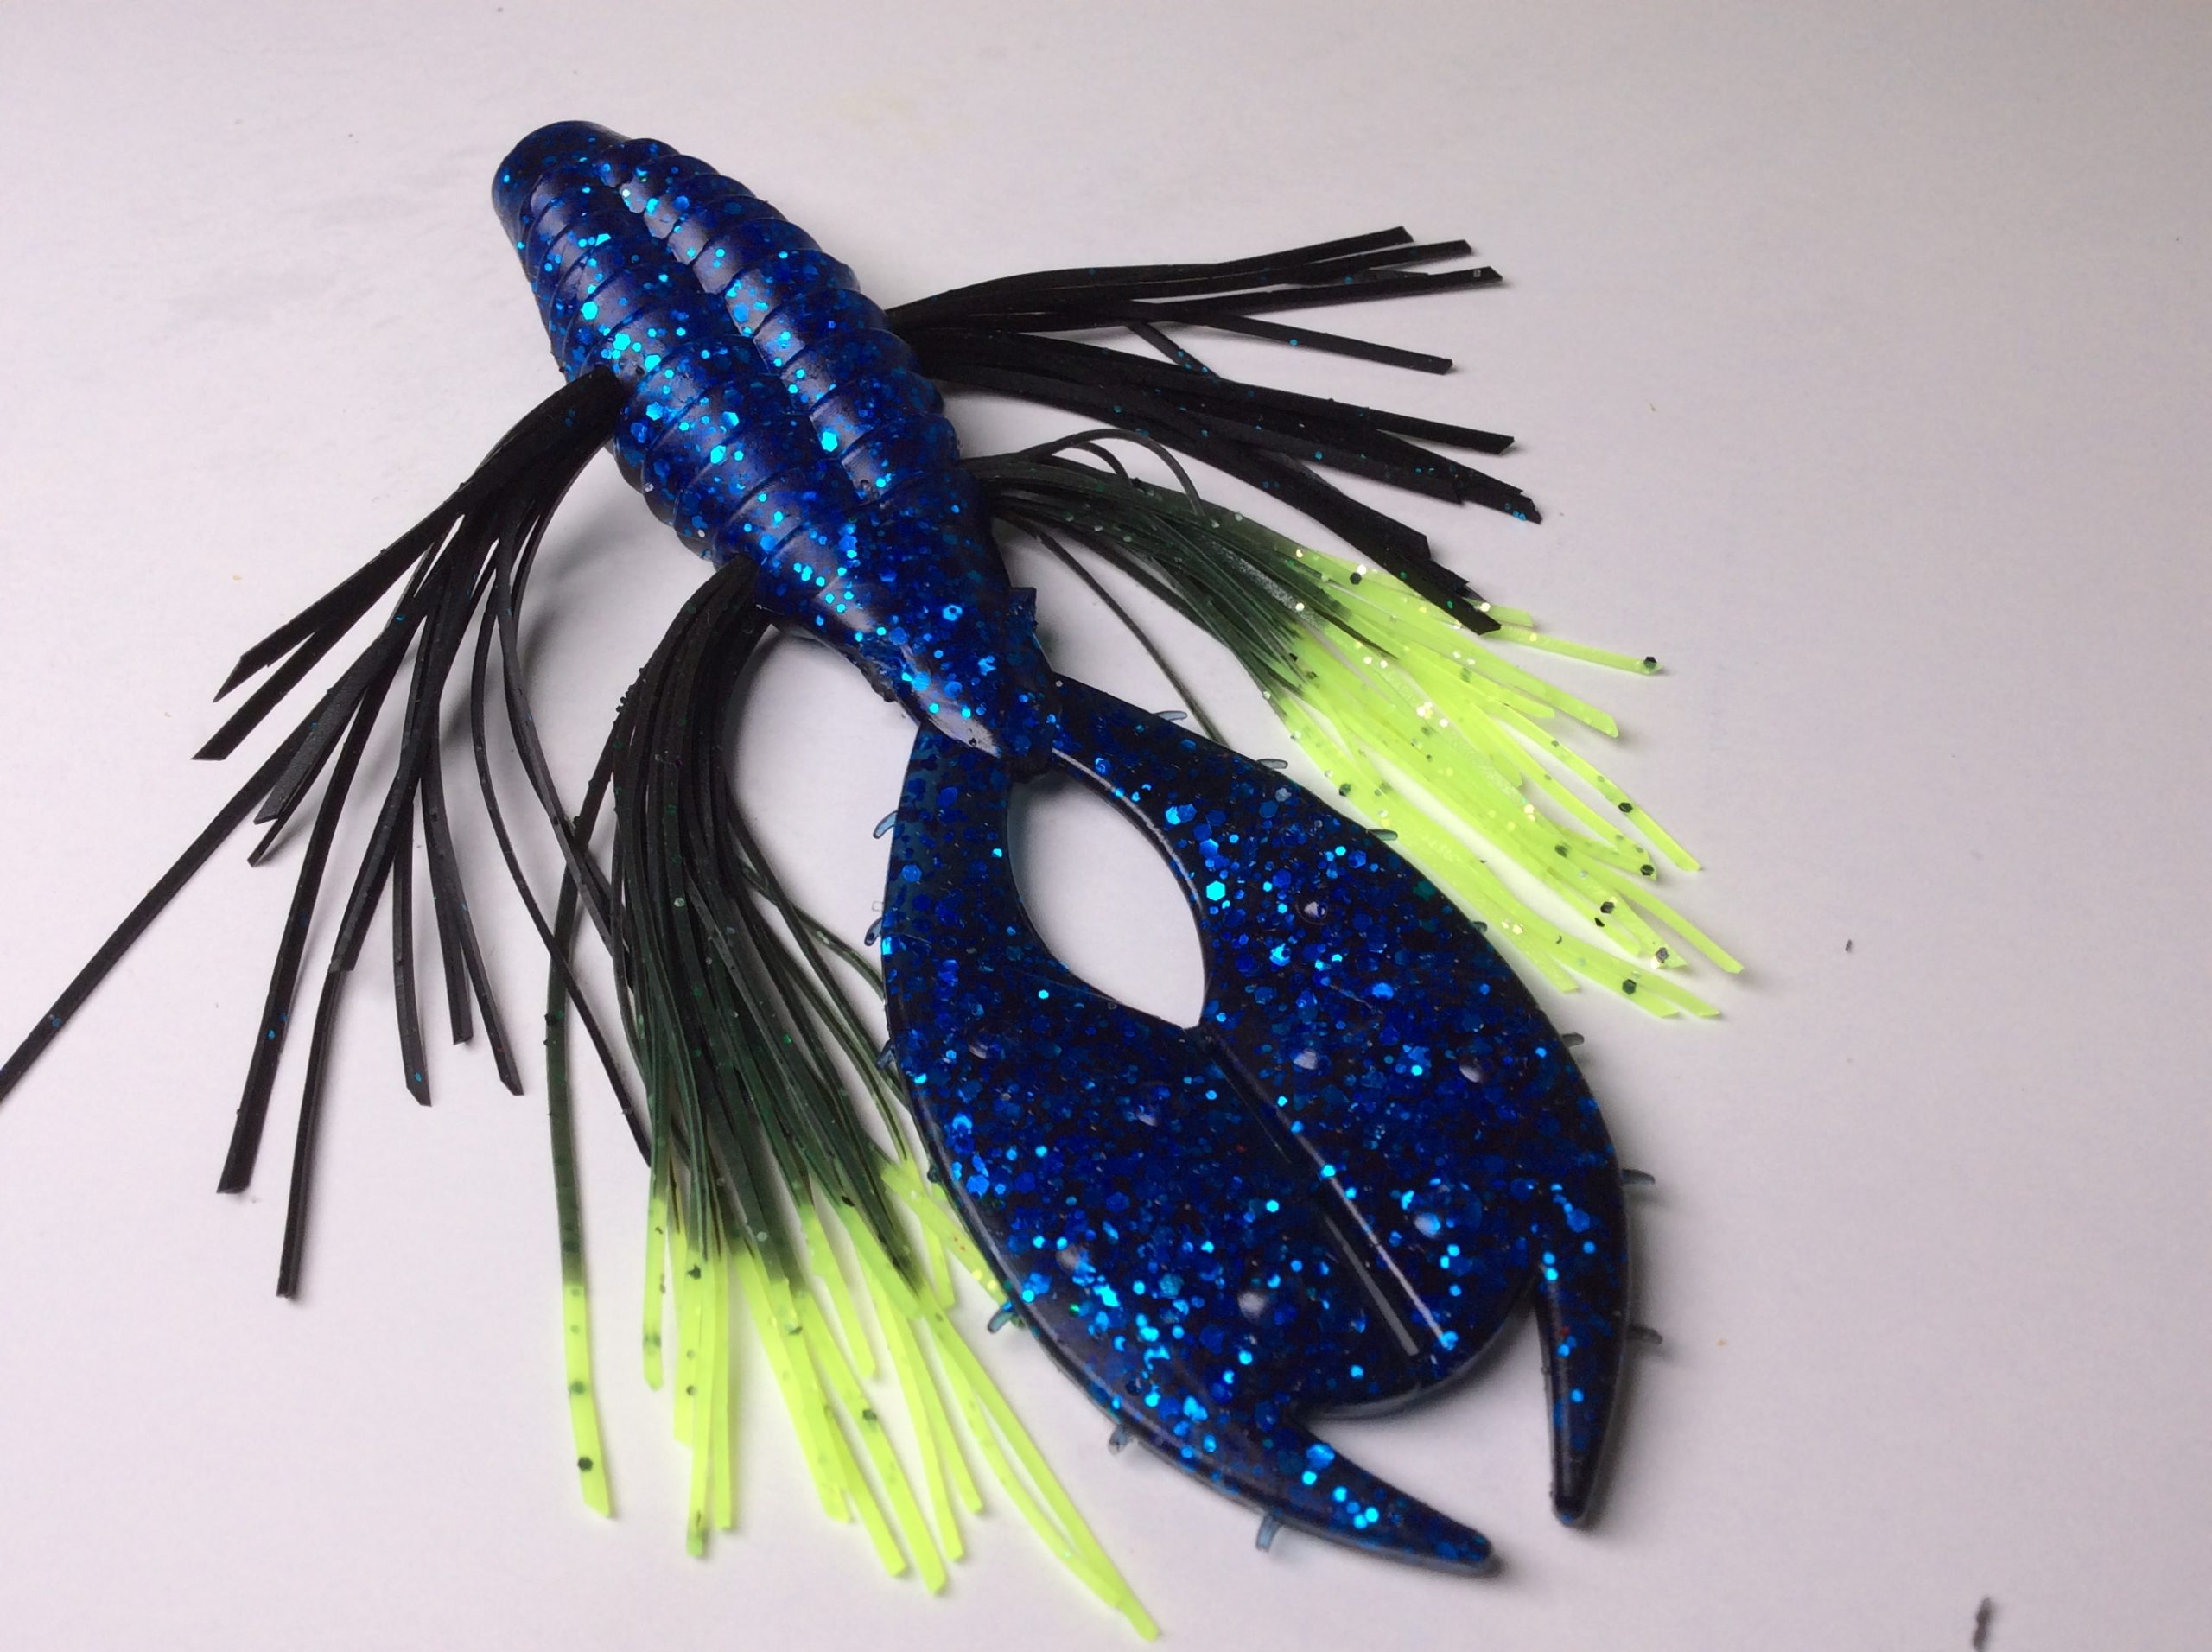 UV Whank'R Trout Worms – Tightlines UV Lures